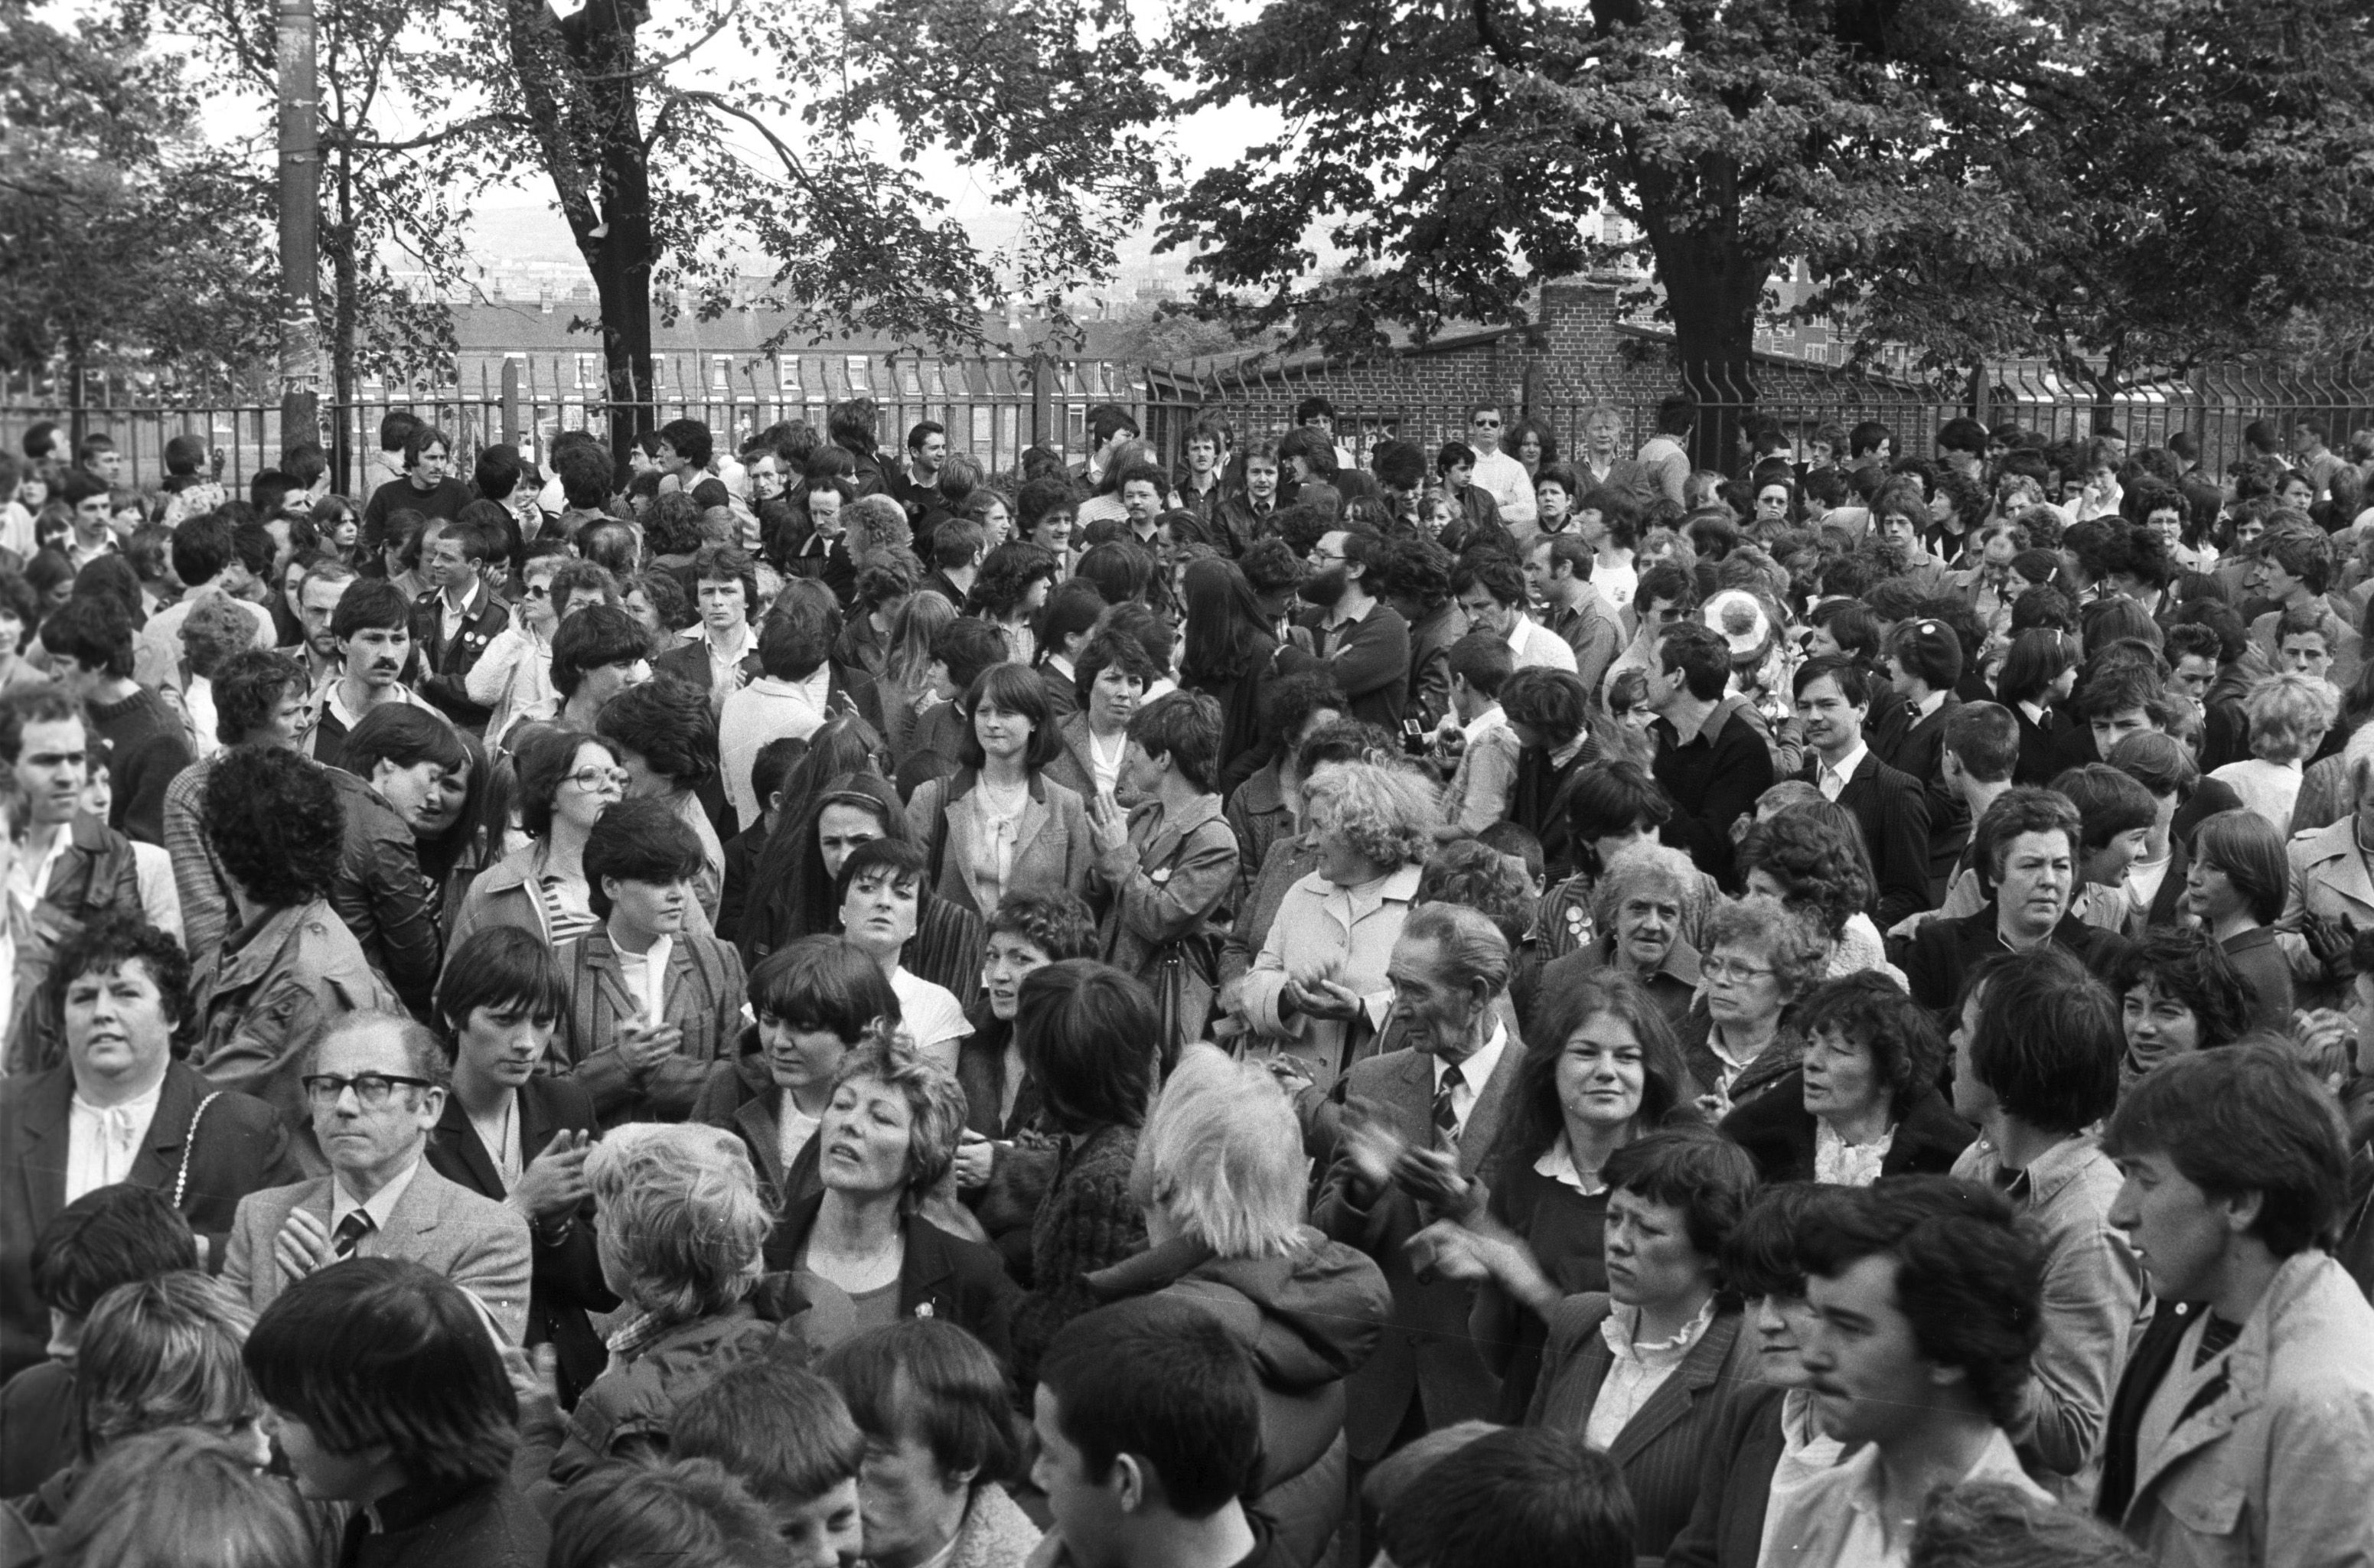 FACE IN THE CROWD: H-Block/Armagh Committee rally at Dunville Park in May 1982 